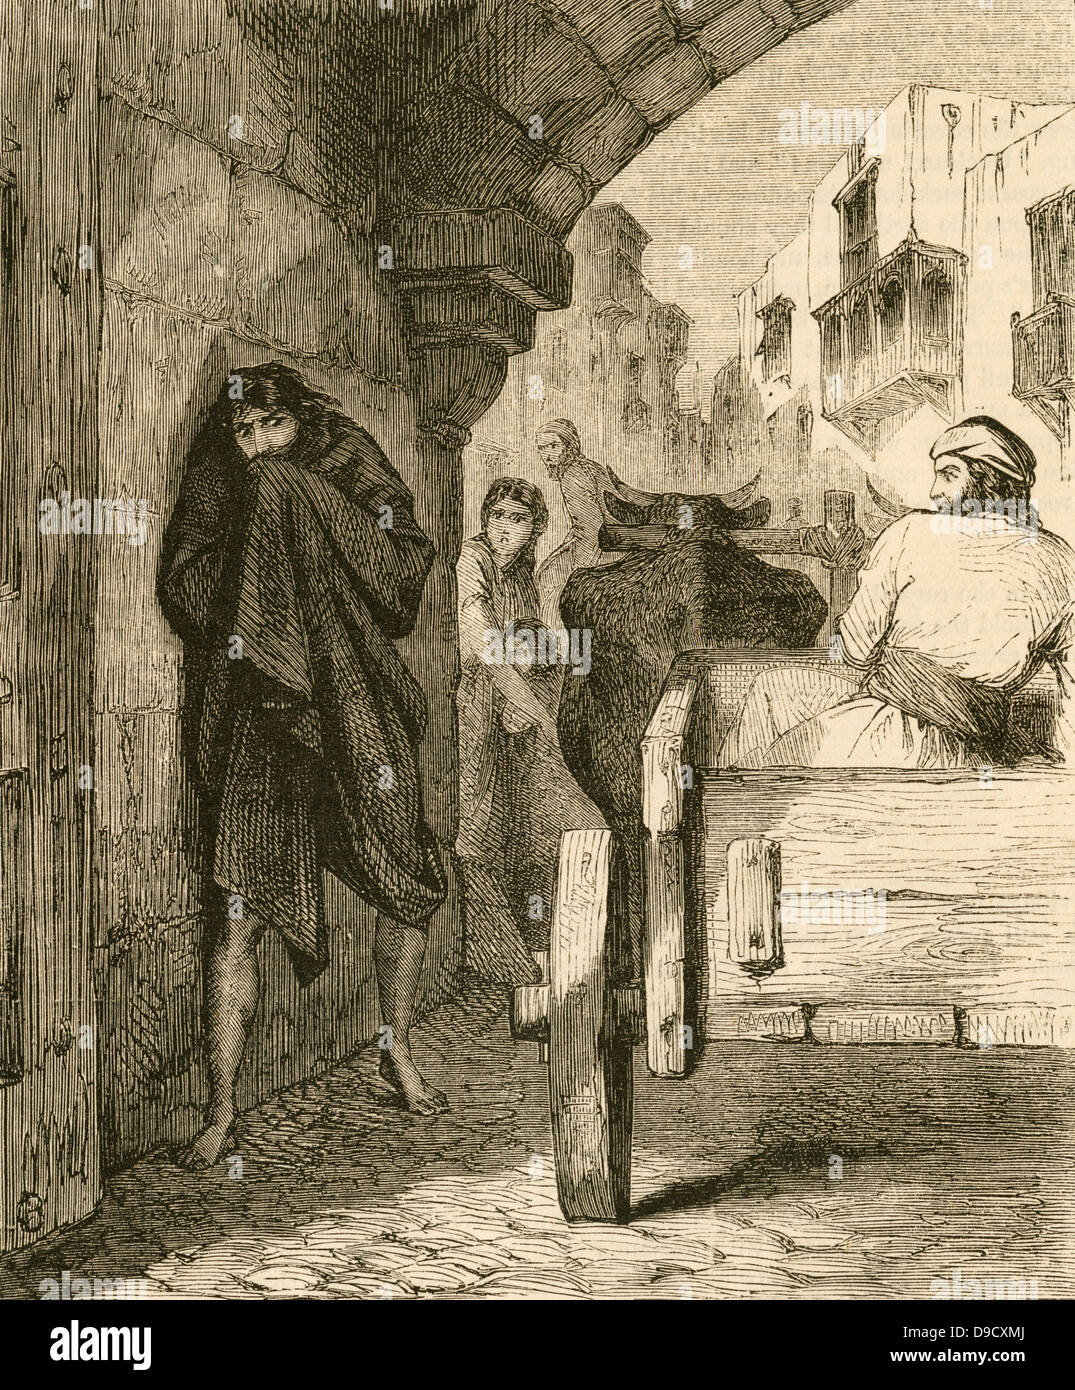 Room for the Leper! Room!  Because of the fear of contracting Leprosy by contact with a sufferer, lepers were considered unclean and isolated in Leper Hospitals. Engraving c1870. Stock Photo